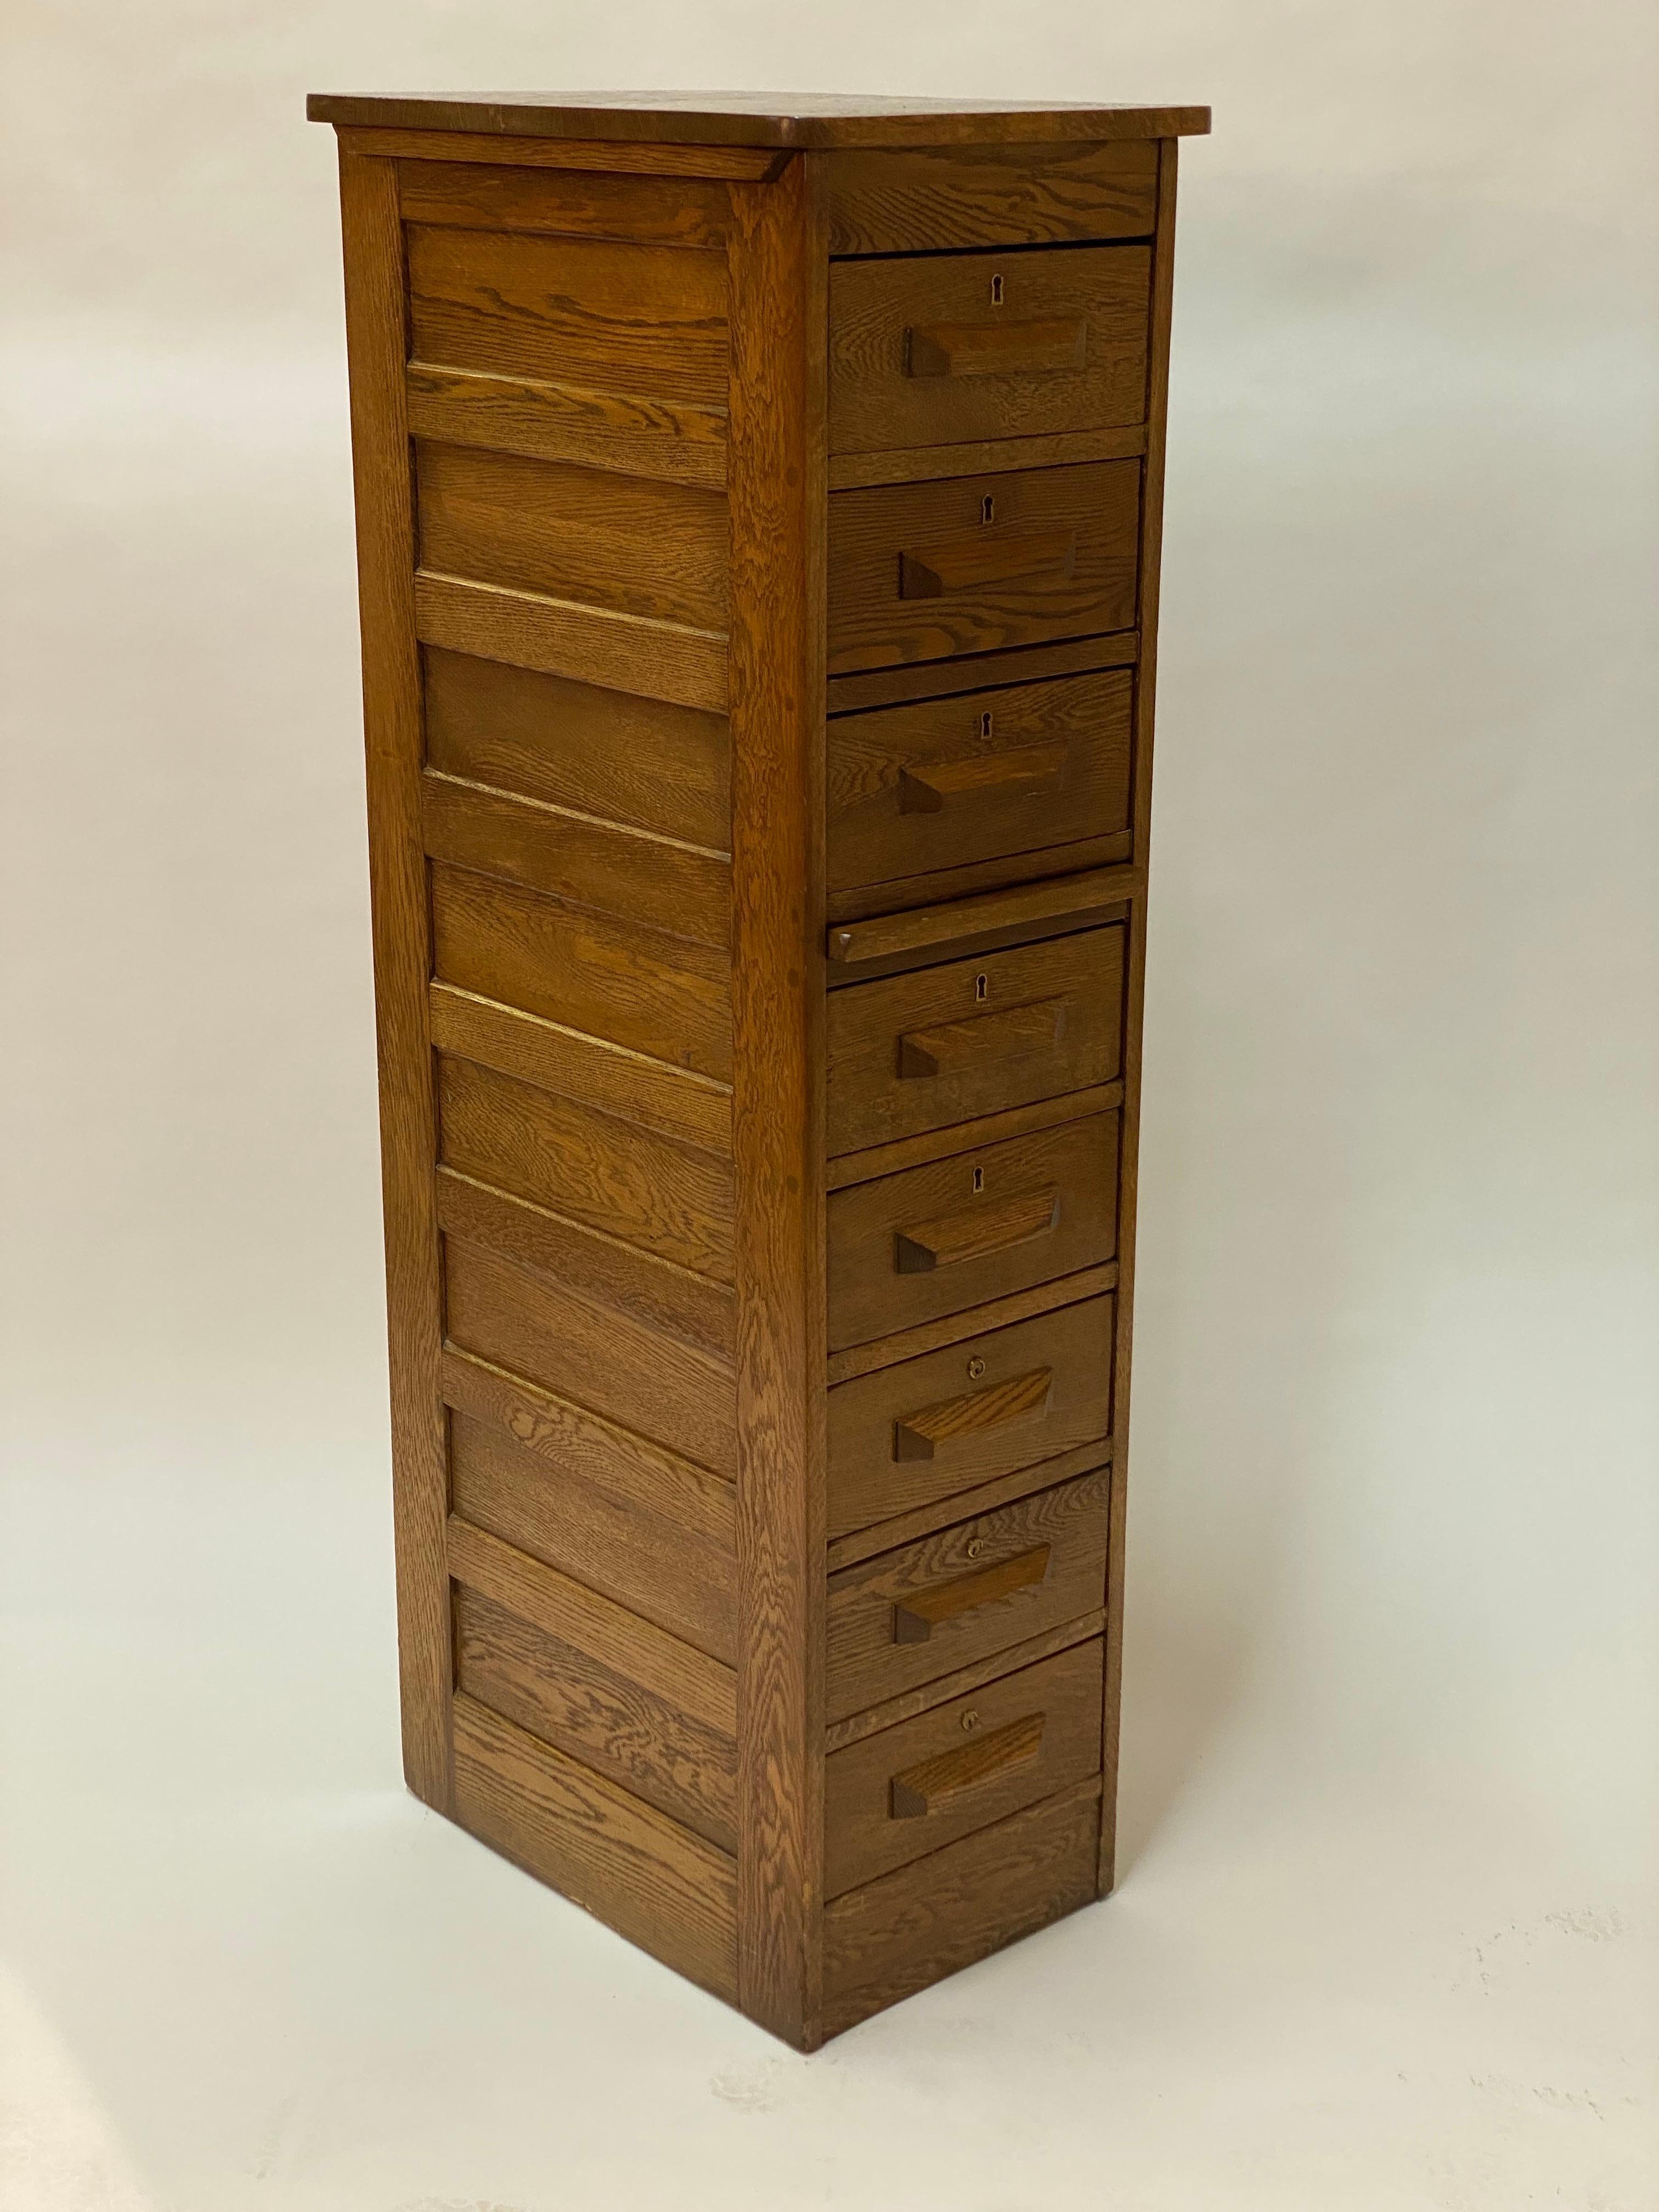 Tall solid golden oak eight drawer cabinet. Circa 1910-30. Featuring channeled drawer handles, bread board pull out shelf, doweled joinery and paneled sides. This piece is just a compliment to any small narrow space. The drawers originally came out